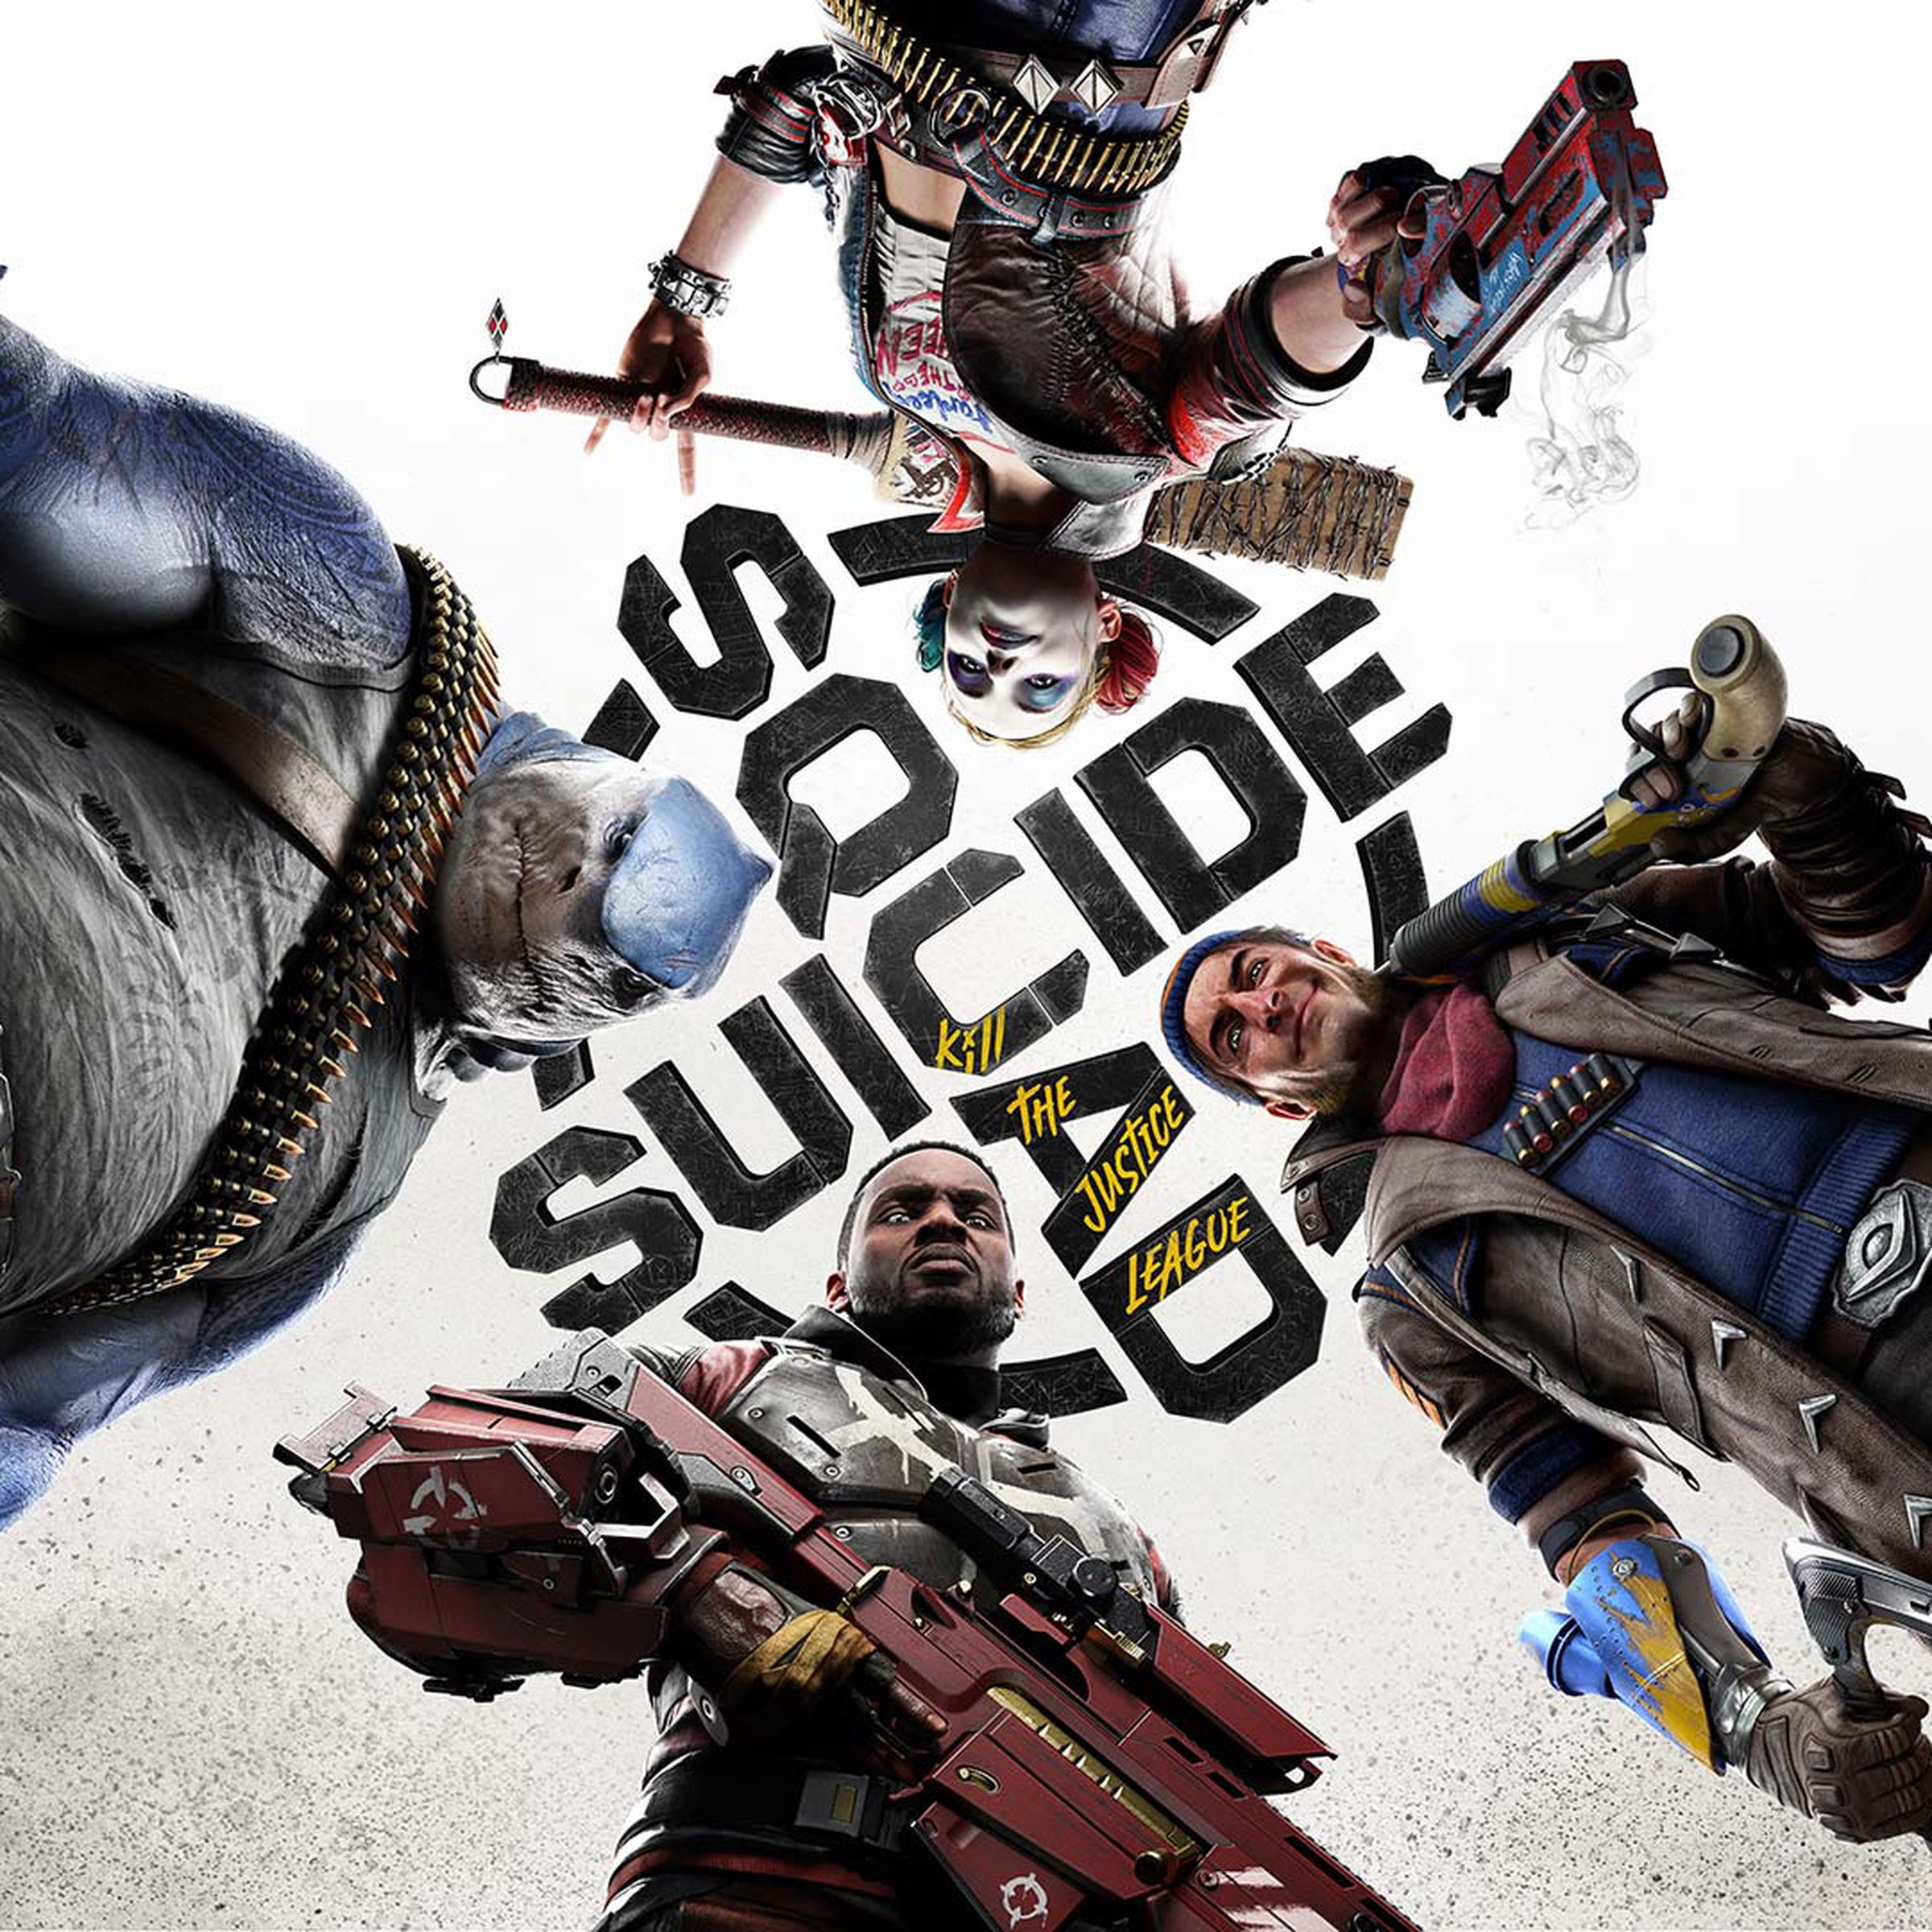 Rocksteady’s take on the Suicide Squad won’t be coming out for another year.